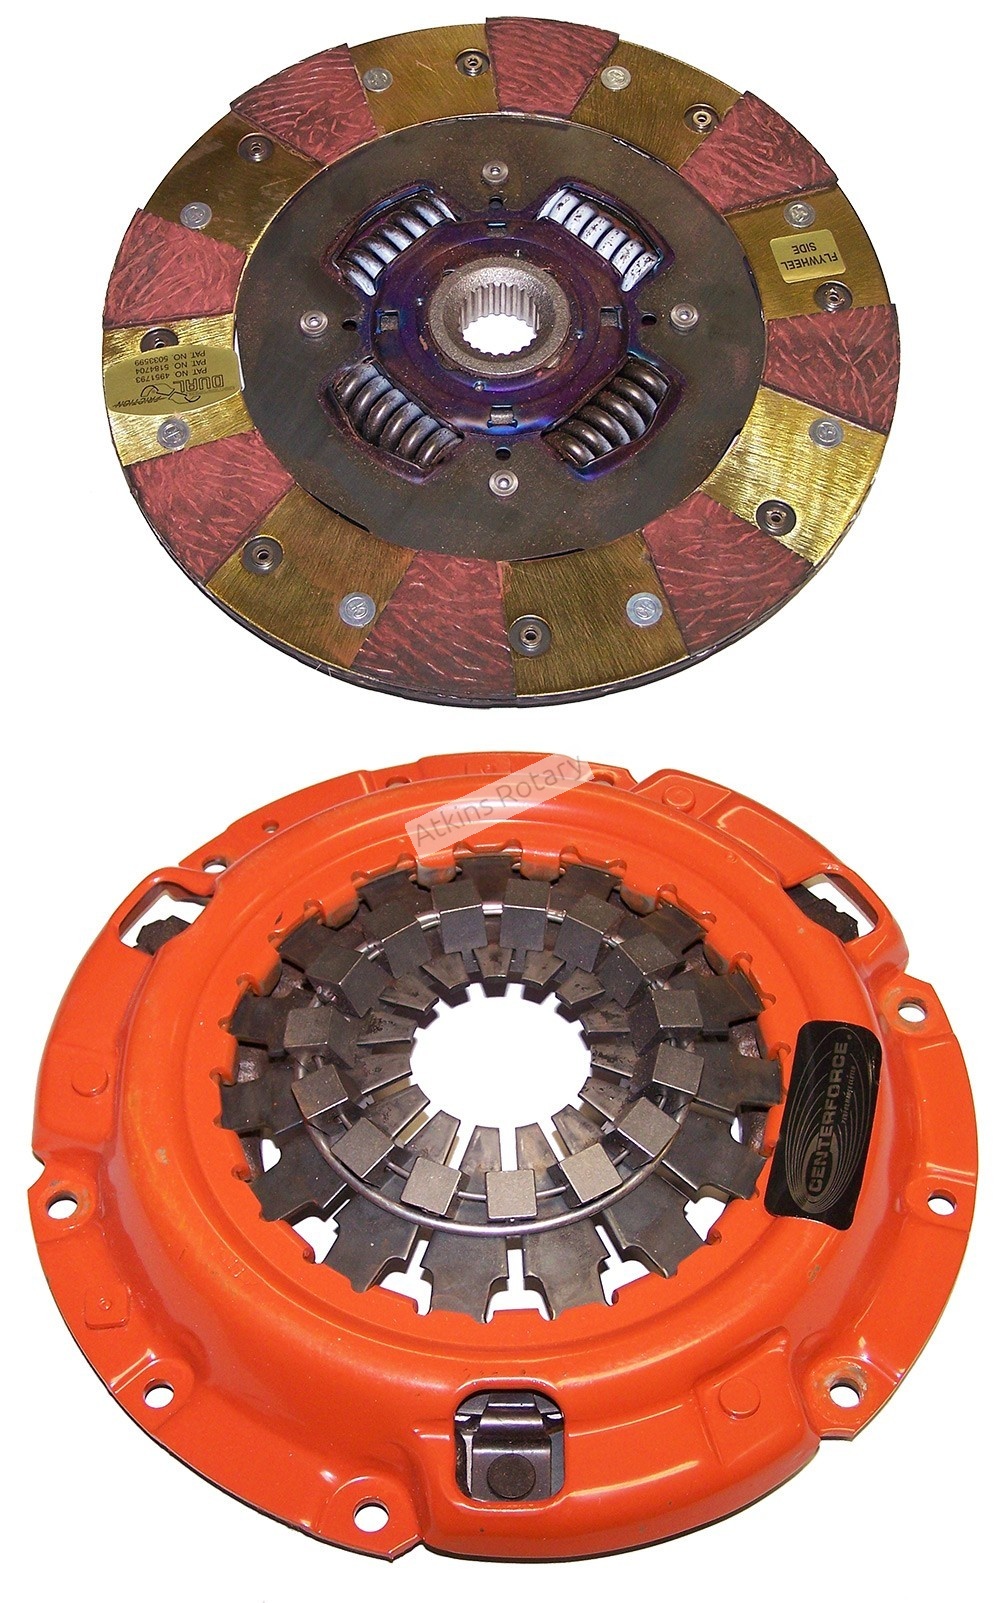 87-88 Turbo Rx7 Centerforce Dual Friction Clutch Kit (DF532009)